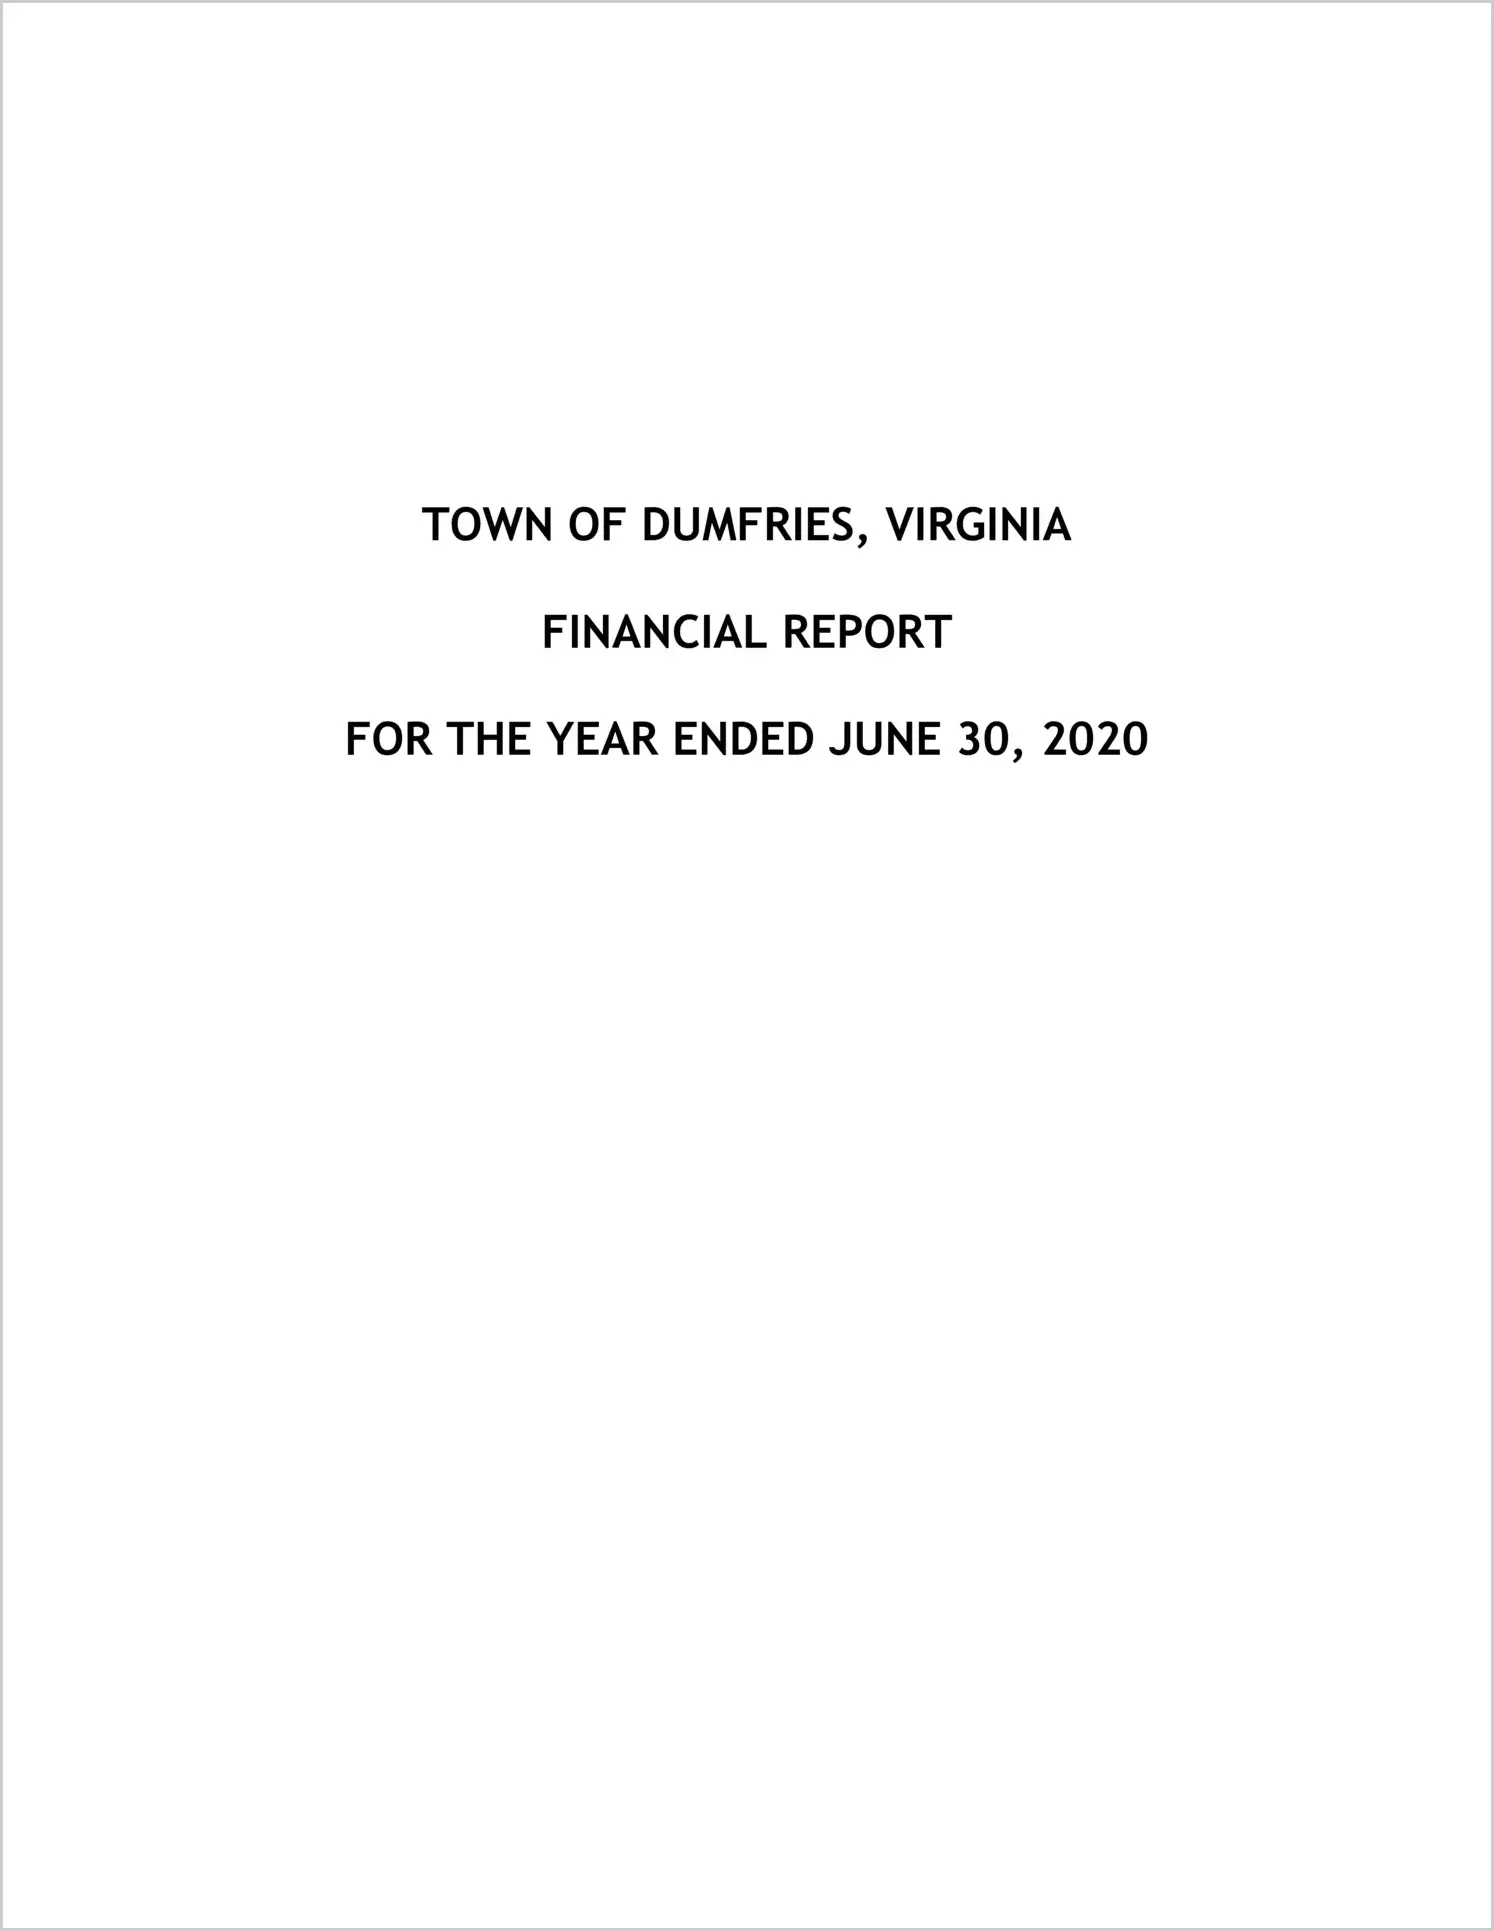 2020 Annual Financial Report for Town of Dumfries